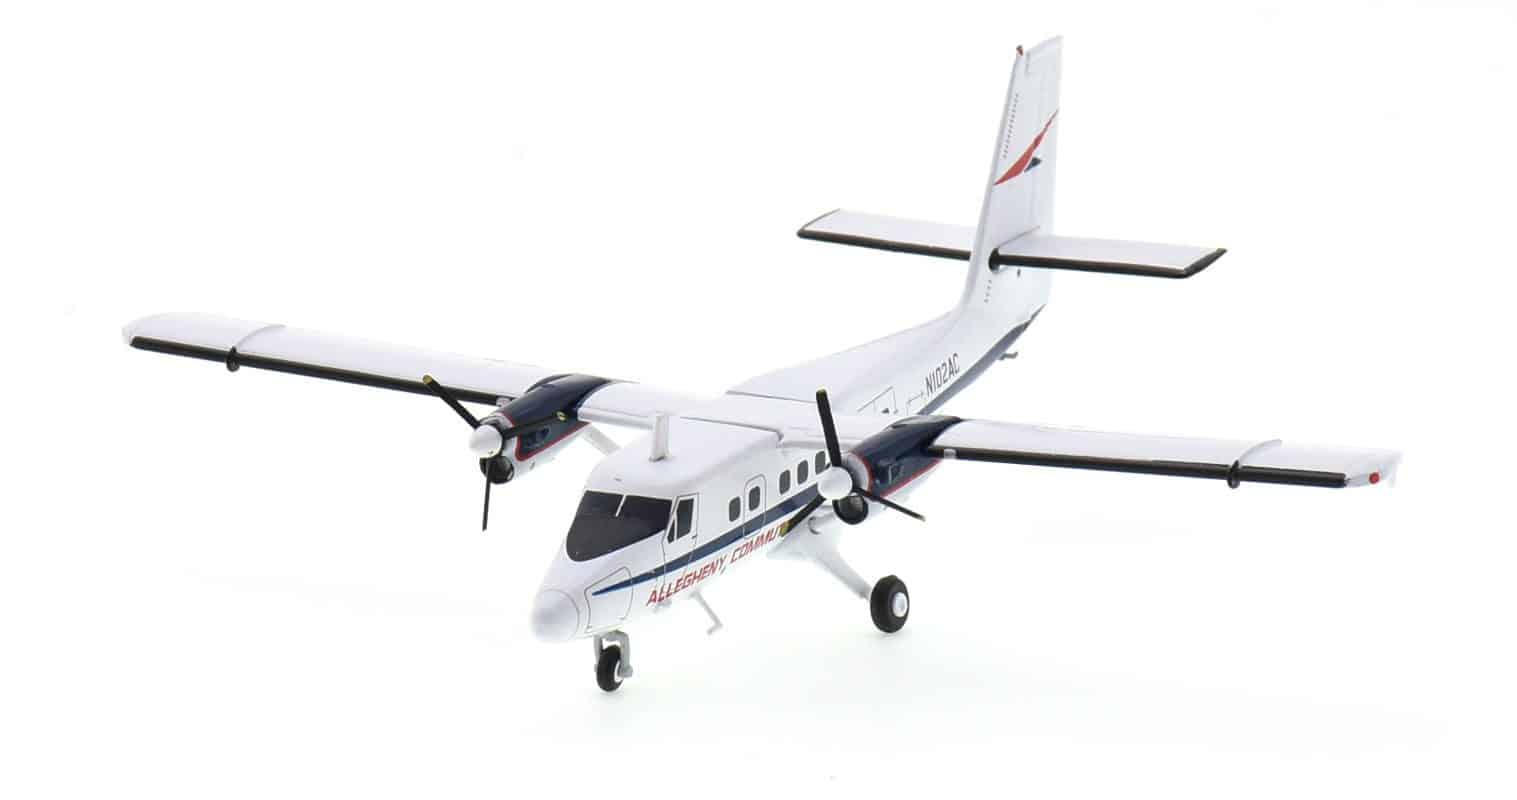 Front port side view of Gemini Jets G2USA1033 - 1/200 scale diecast model de Havilland Canada DHC-6-300 Twin Otter, registration N102AC in Allegheny Commuter livery, circa the early 1970s.